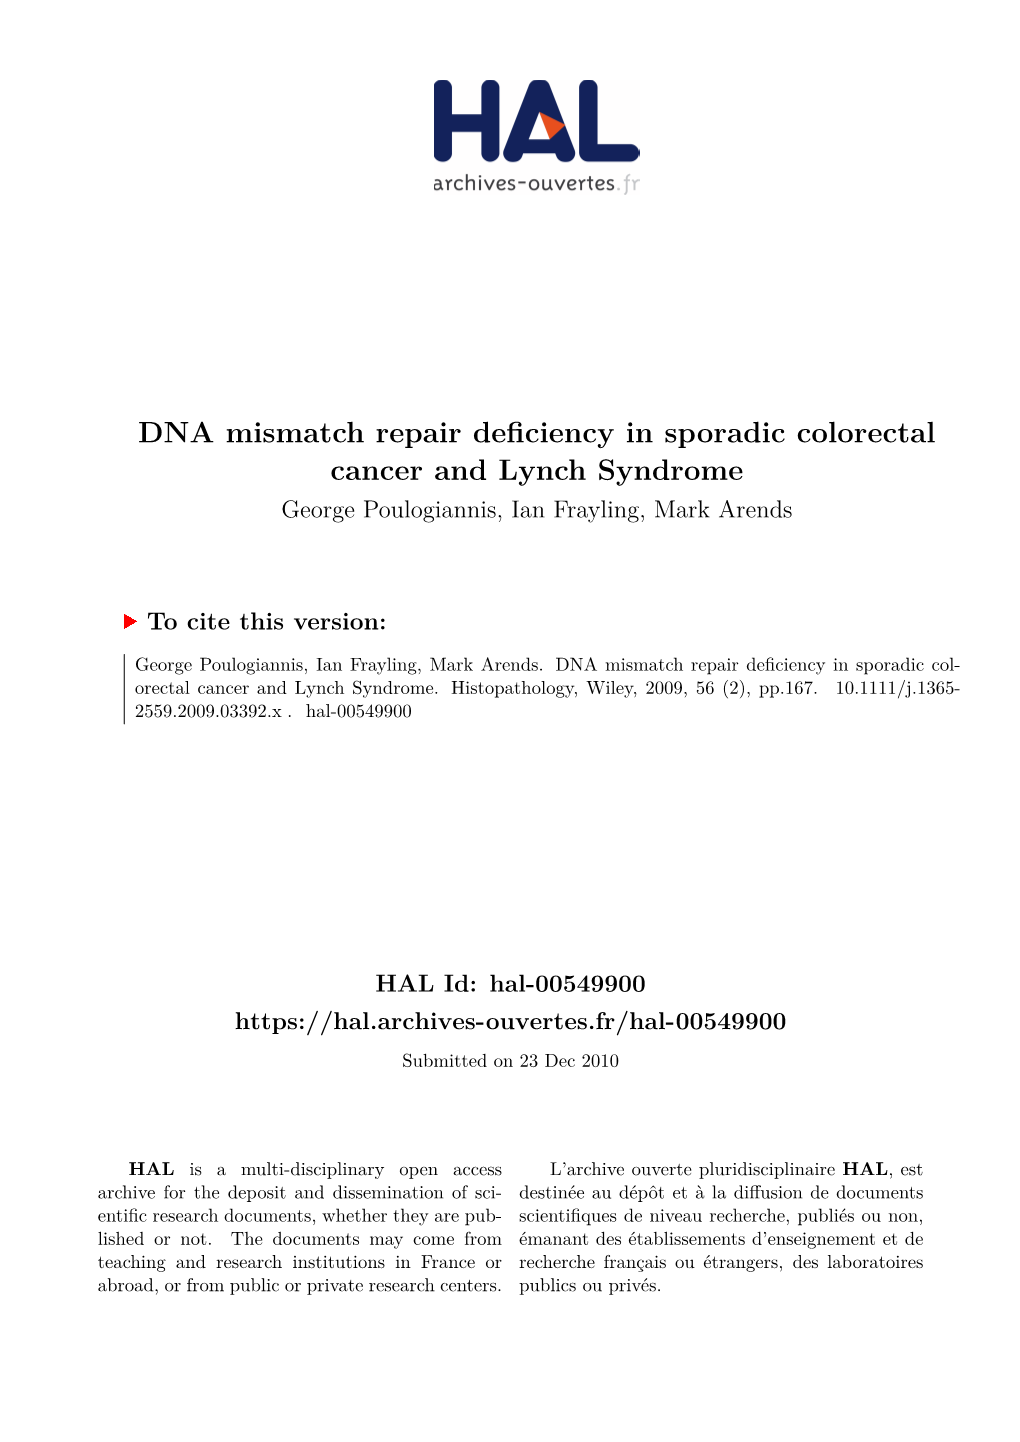 DNA Mismatch Repair Deficiency in Sporadic Colorectal Cancer and Lynch Syndrome George Poulogiannis, Ian Frayling, Mark Arends